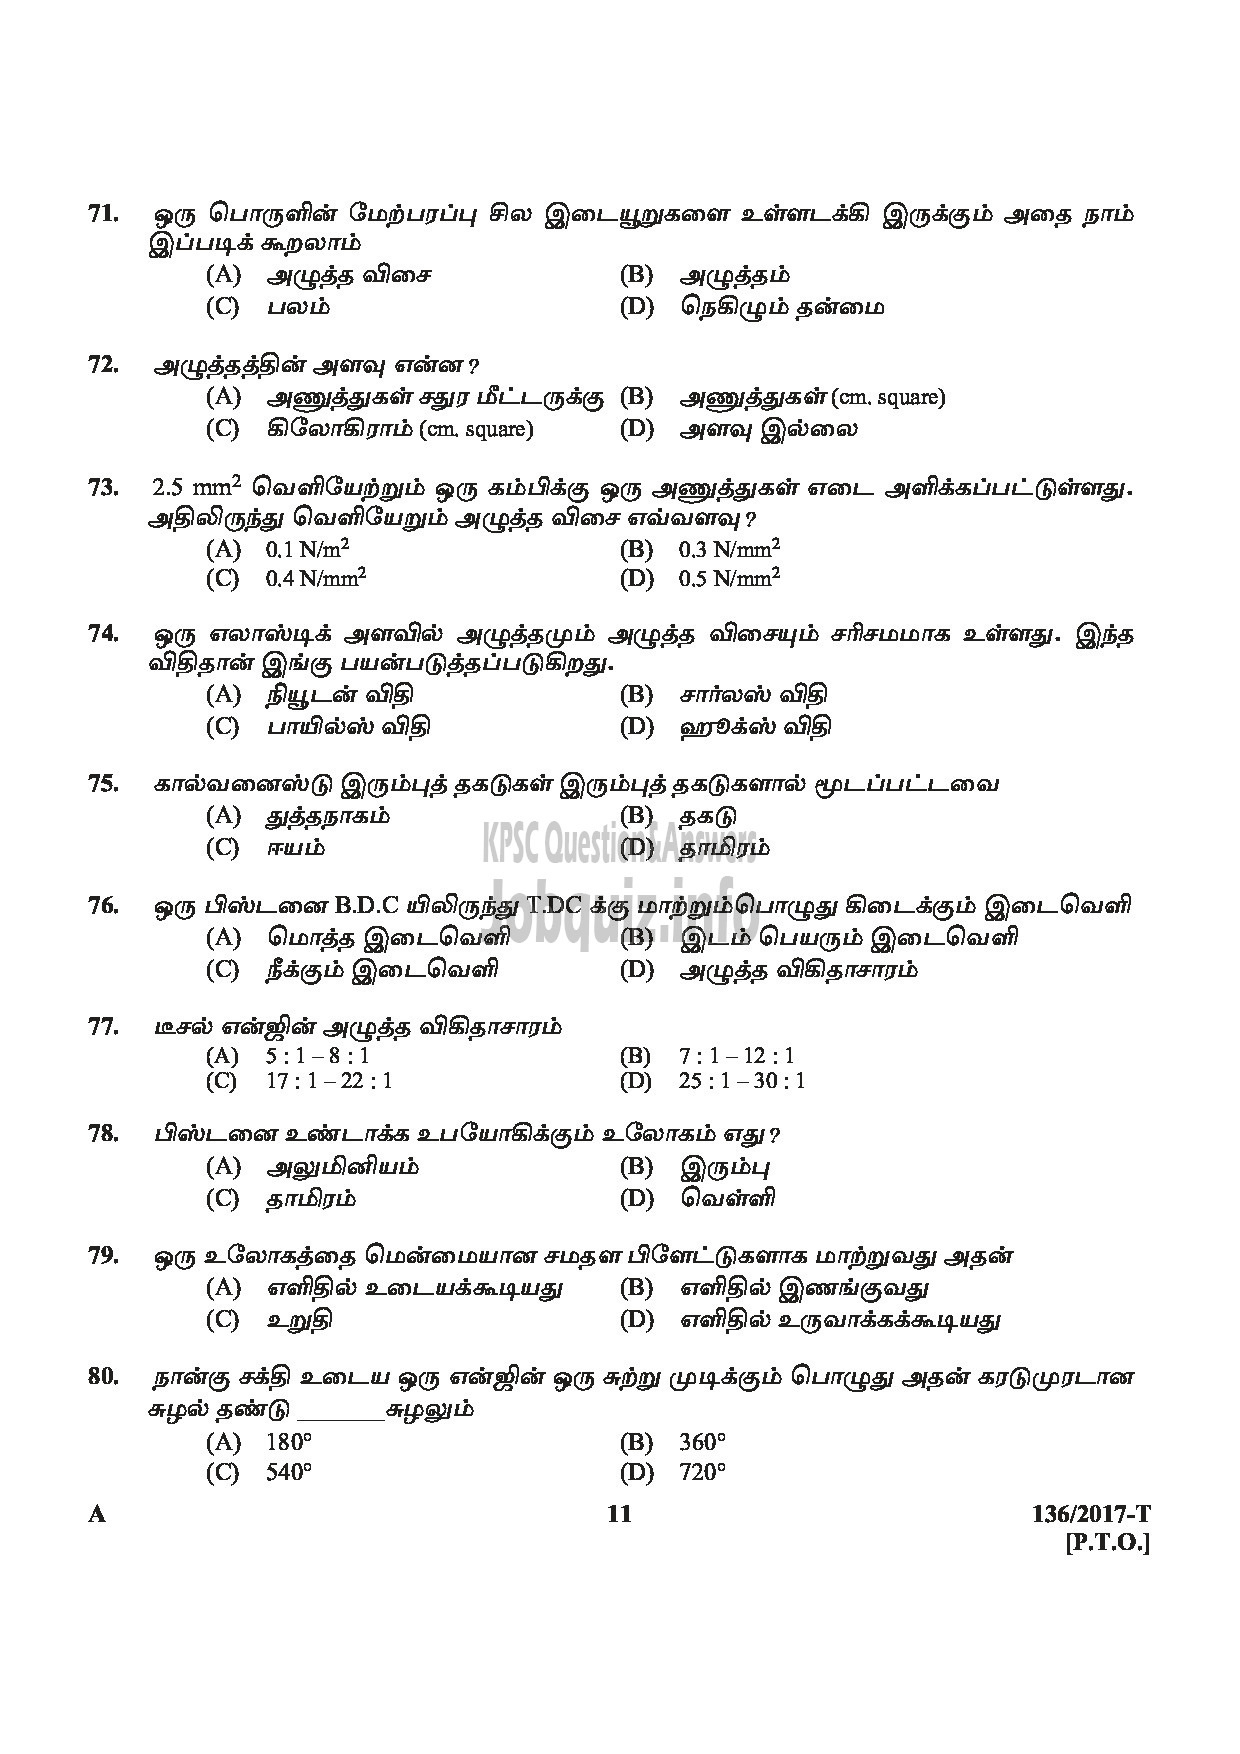 Kerala PSC Question Paper - METER READER/SPOT BILLER SPECIAL RECRUITMENT FROM AMONG ST ONLY MEDIUM OF QUESTION TAMIL-11